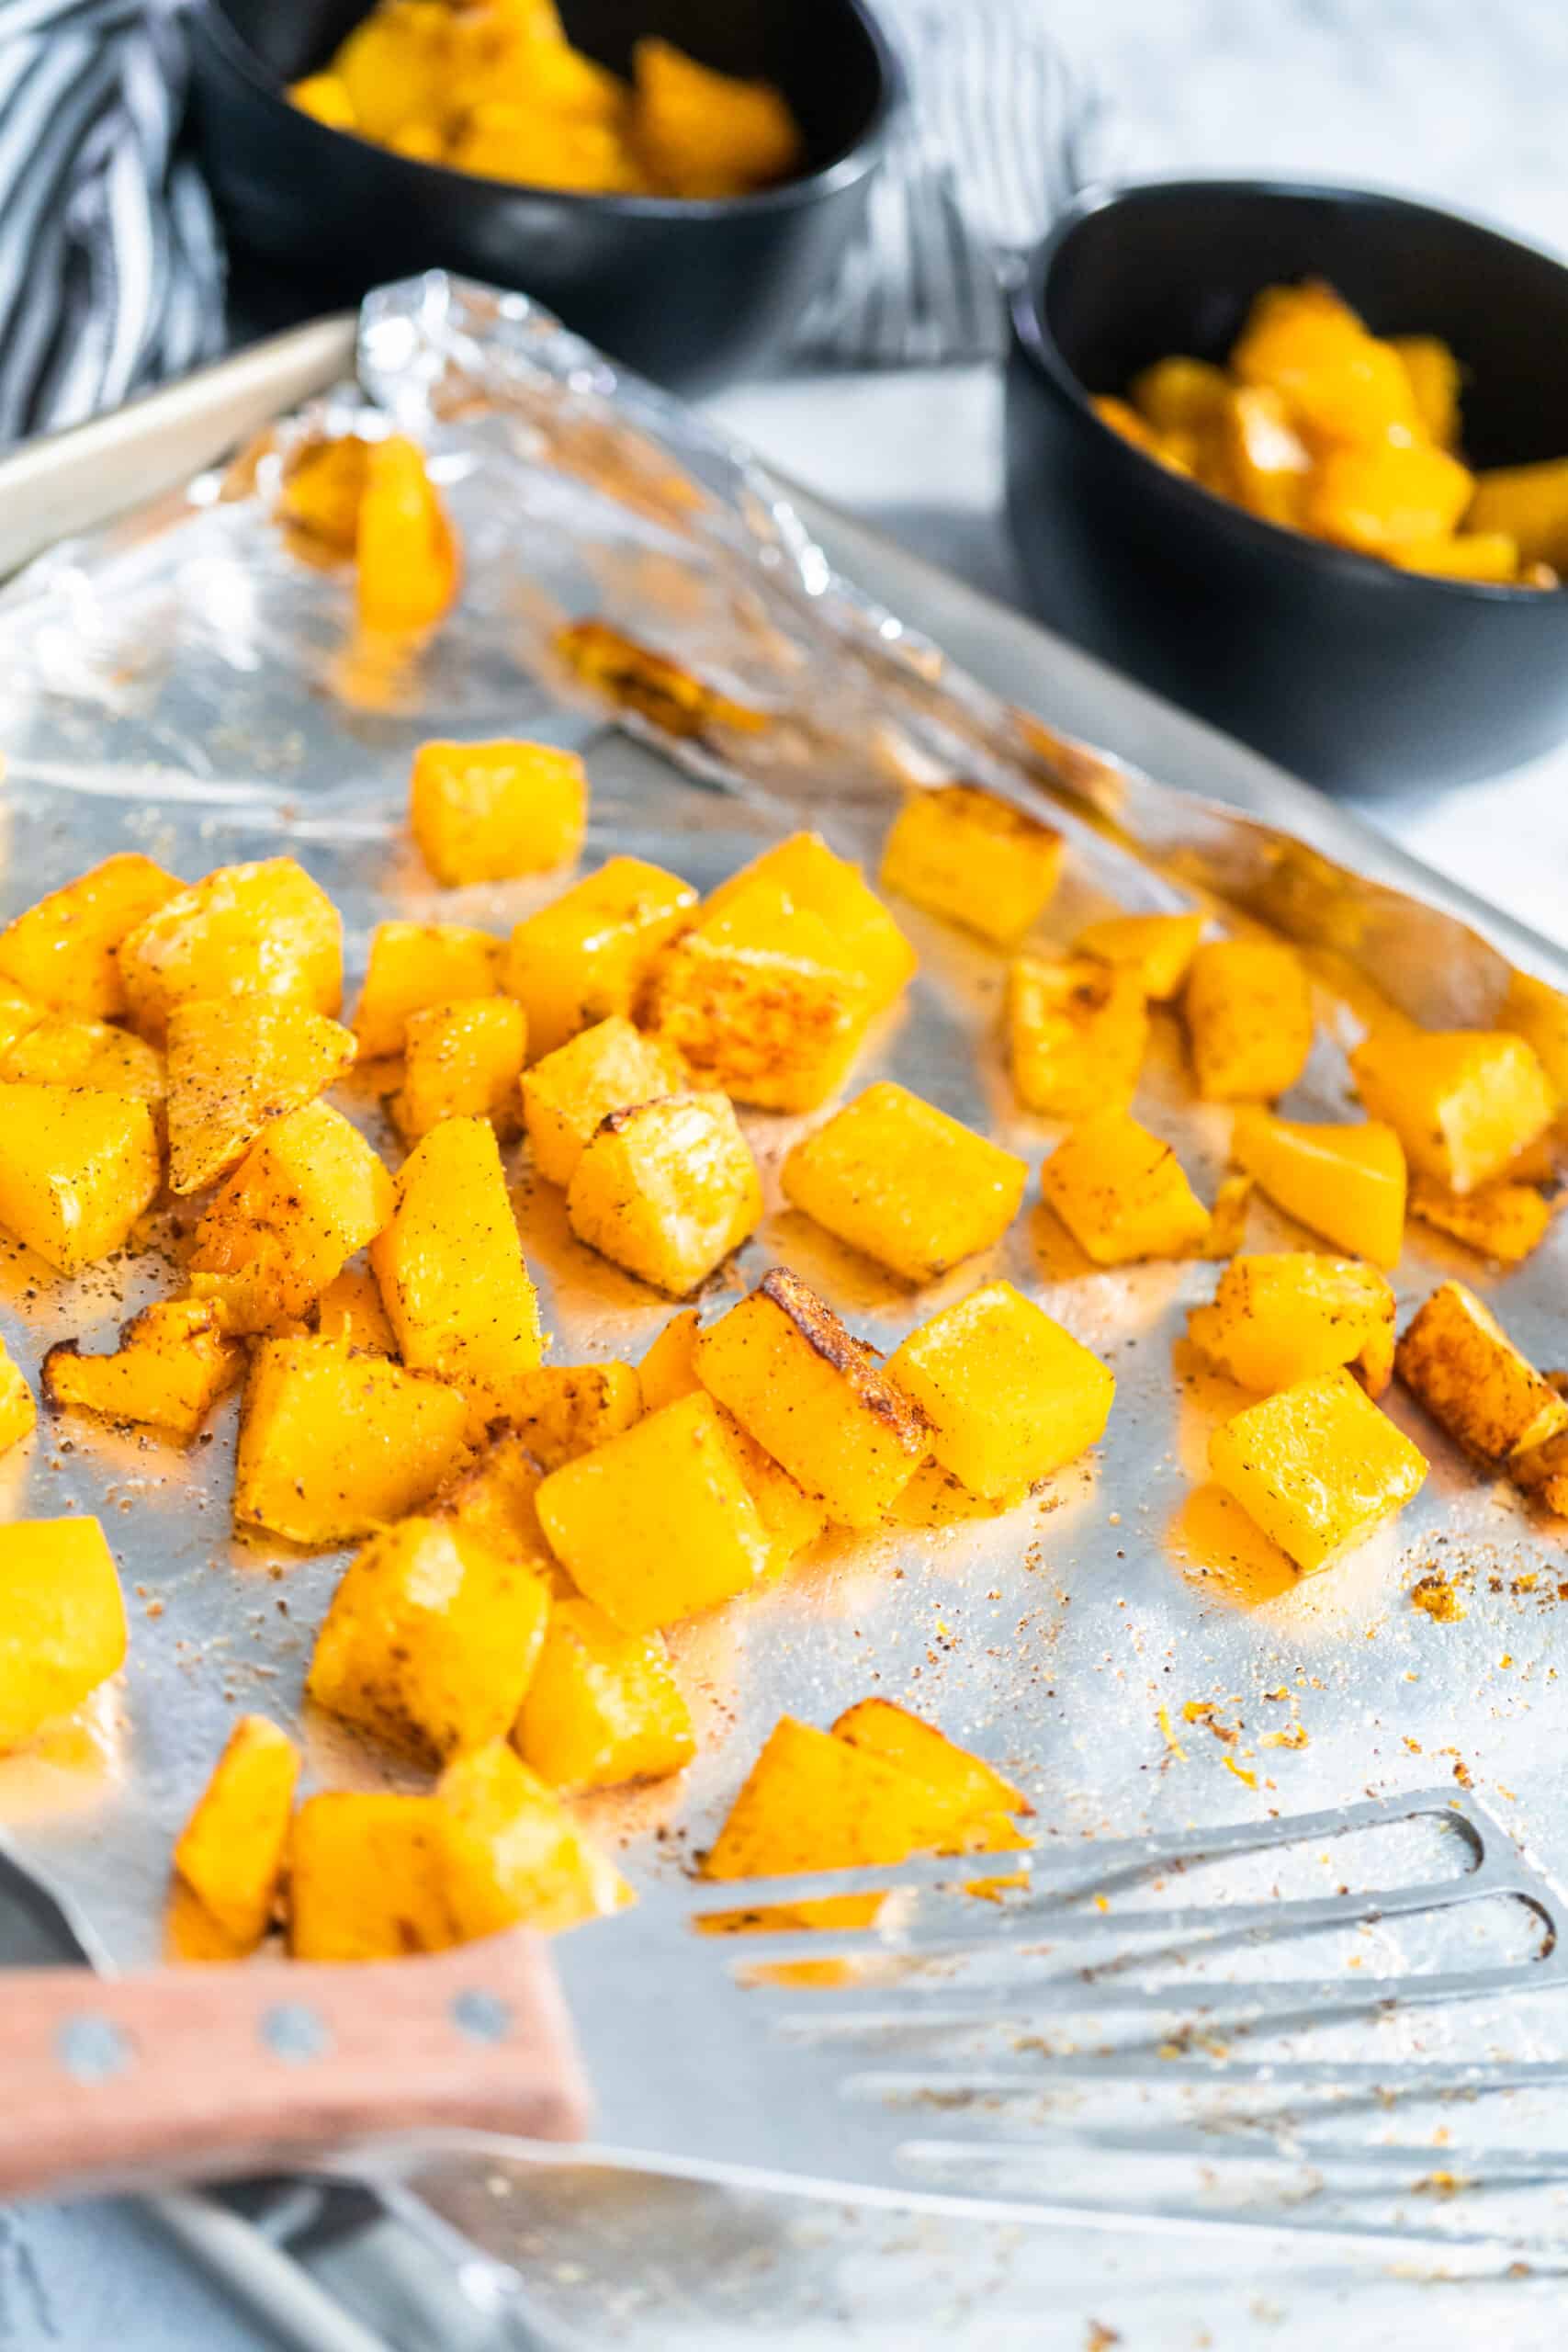 How long to Cook Squash in the Oven